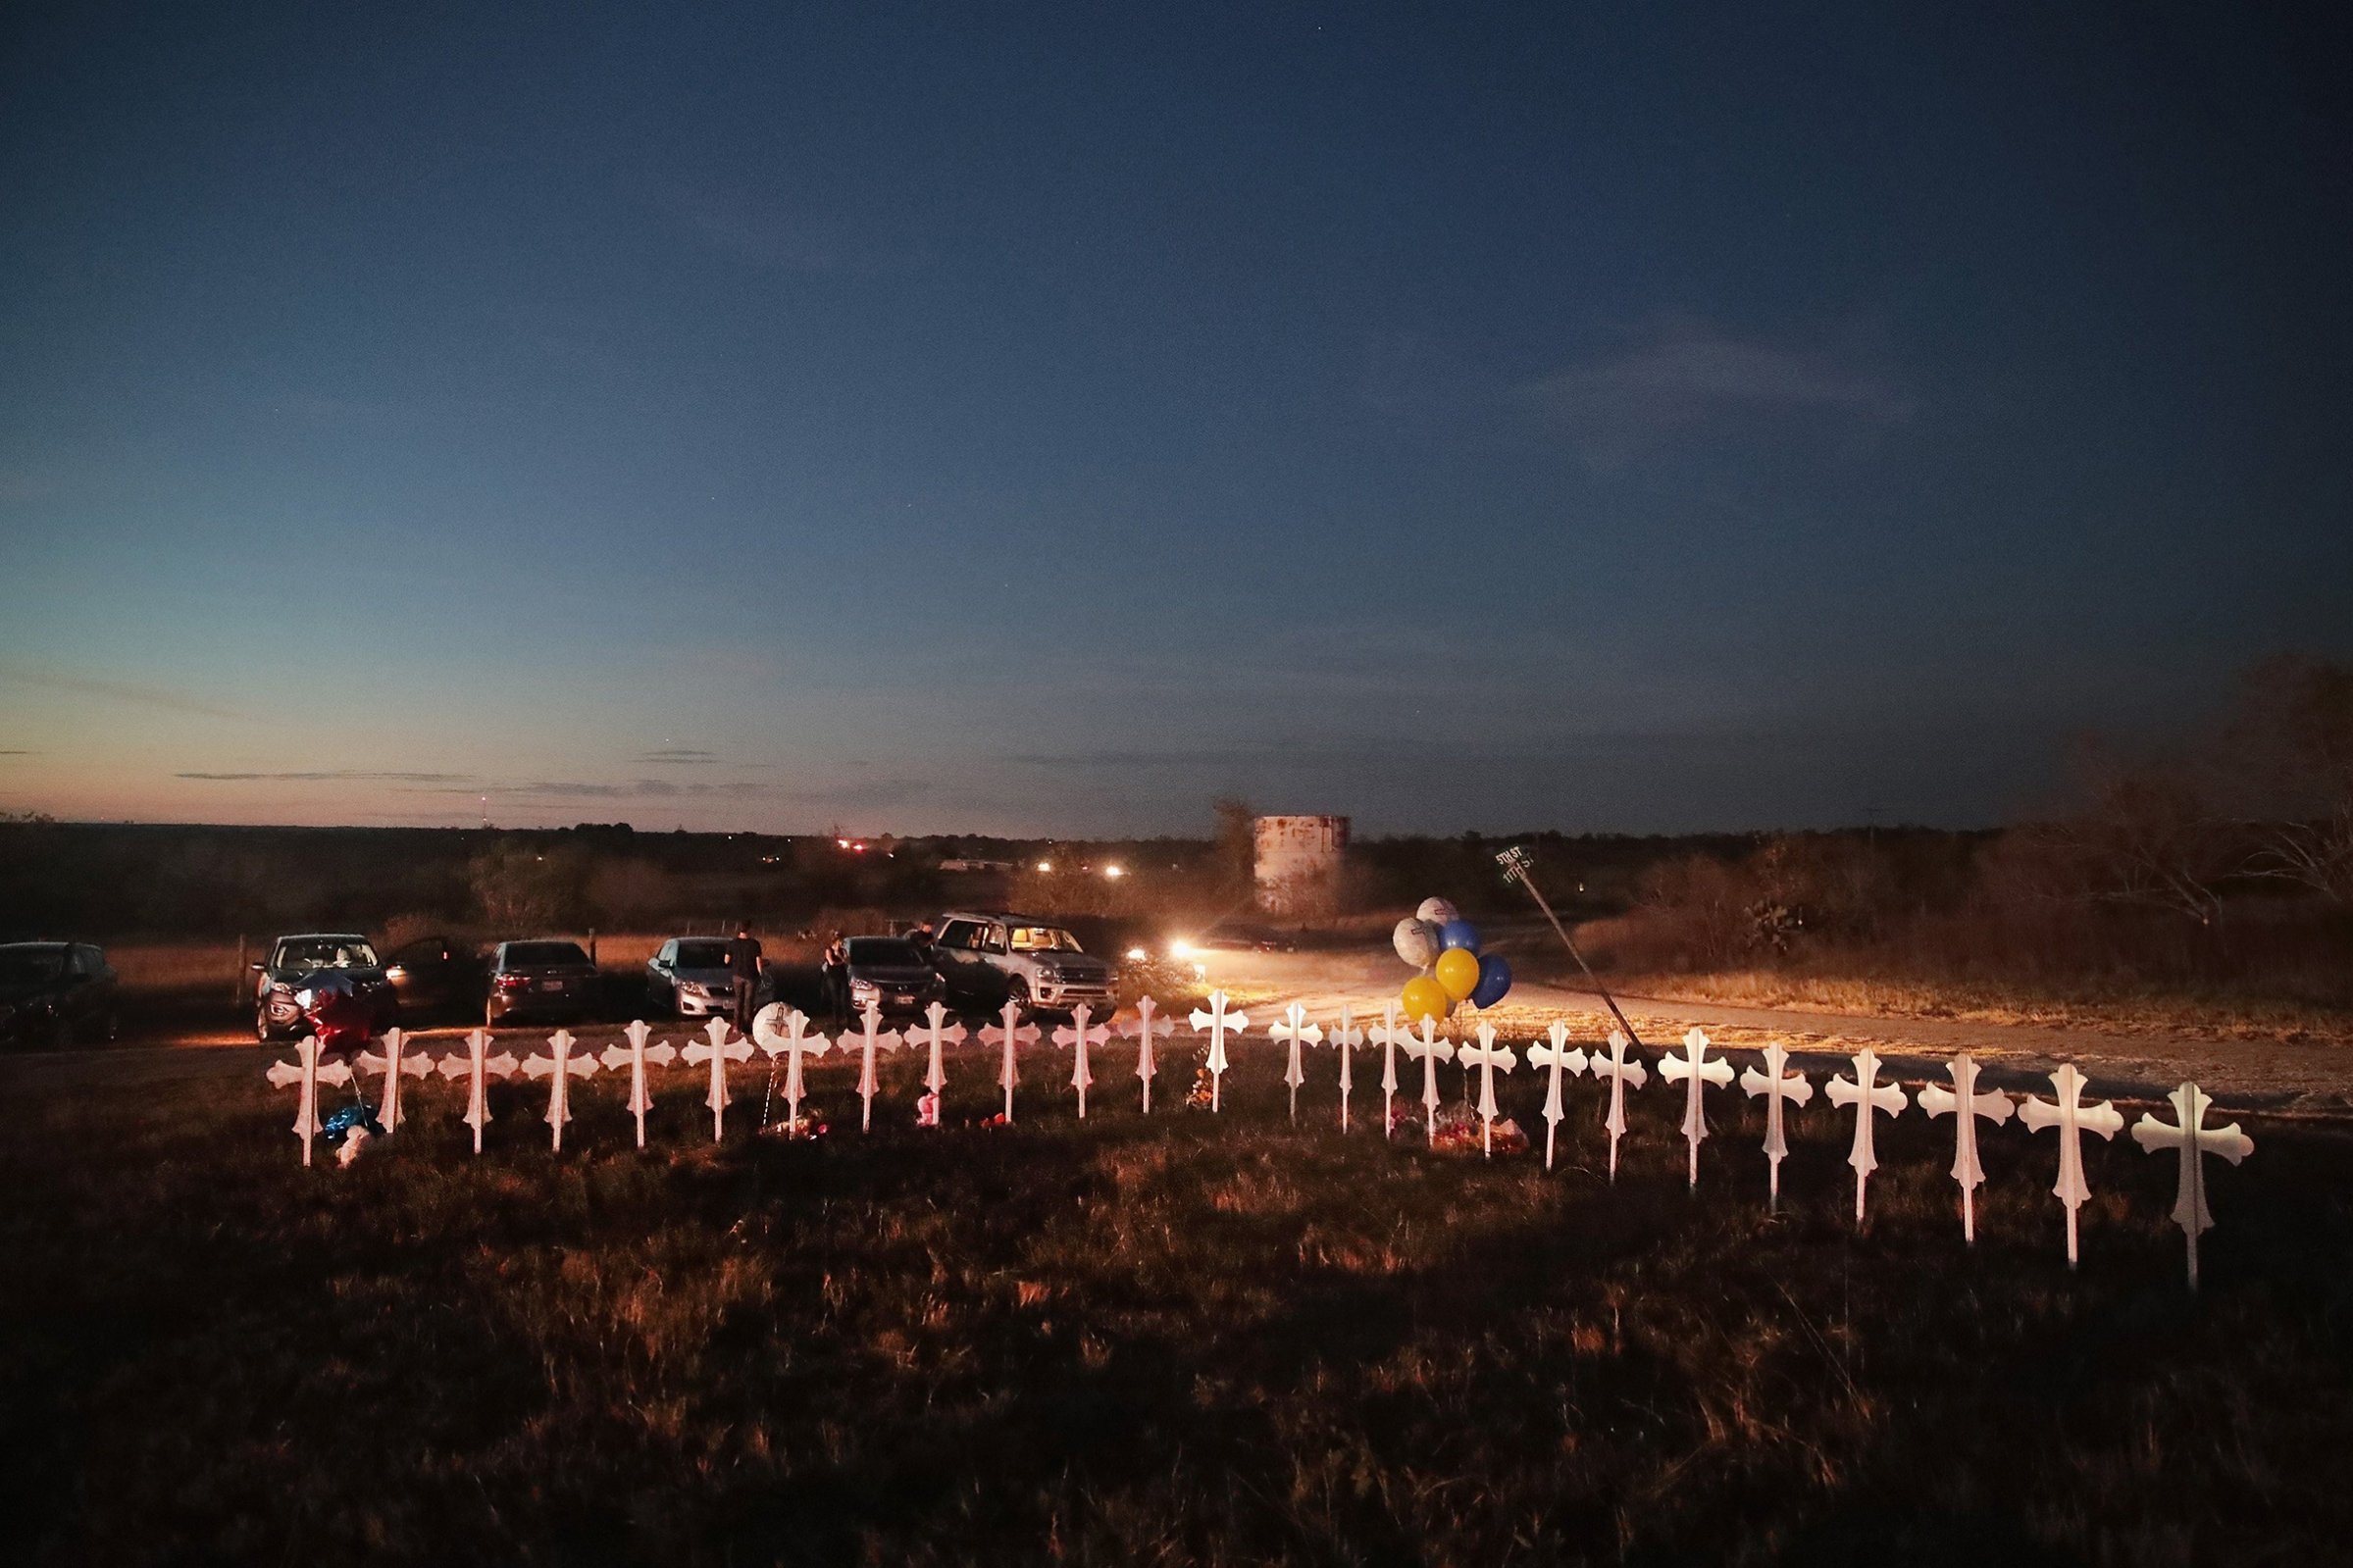 Twenty-six crosses, one for each of the dead, stand in a field on the edge of town on Nov. 6